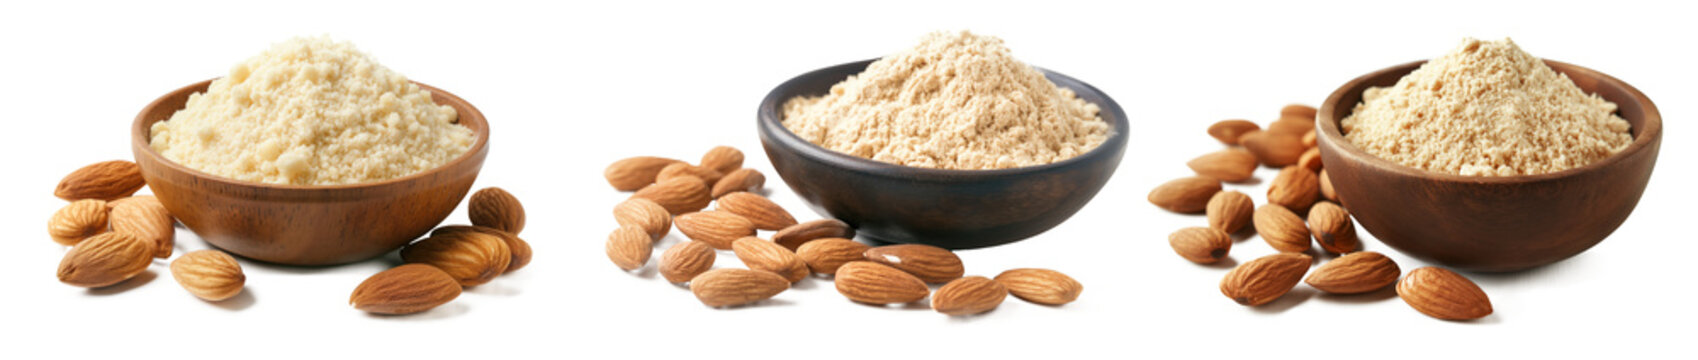 Almond flour in wooden bowl and almonds nut isolated on transparent background